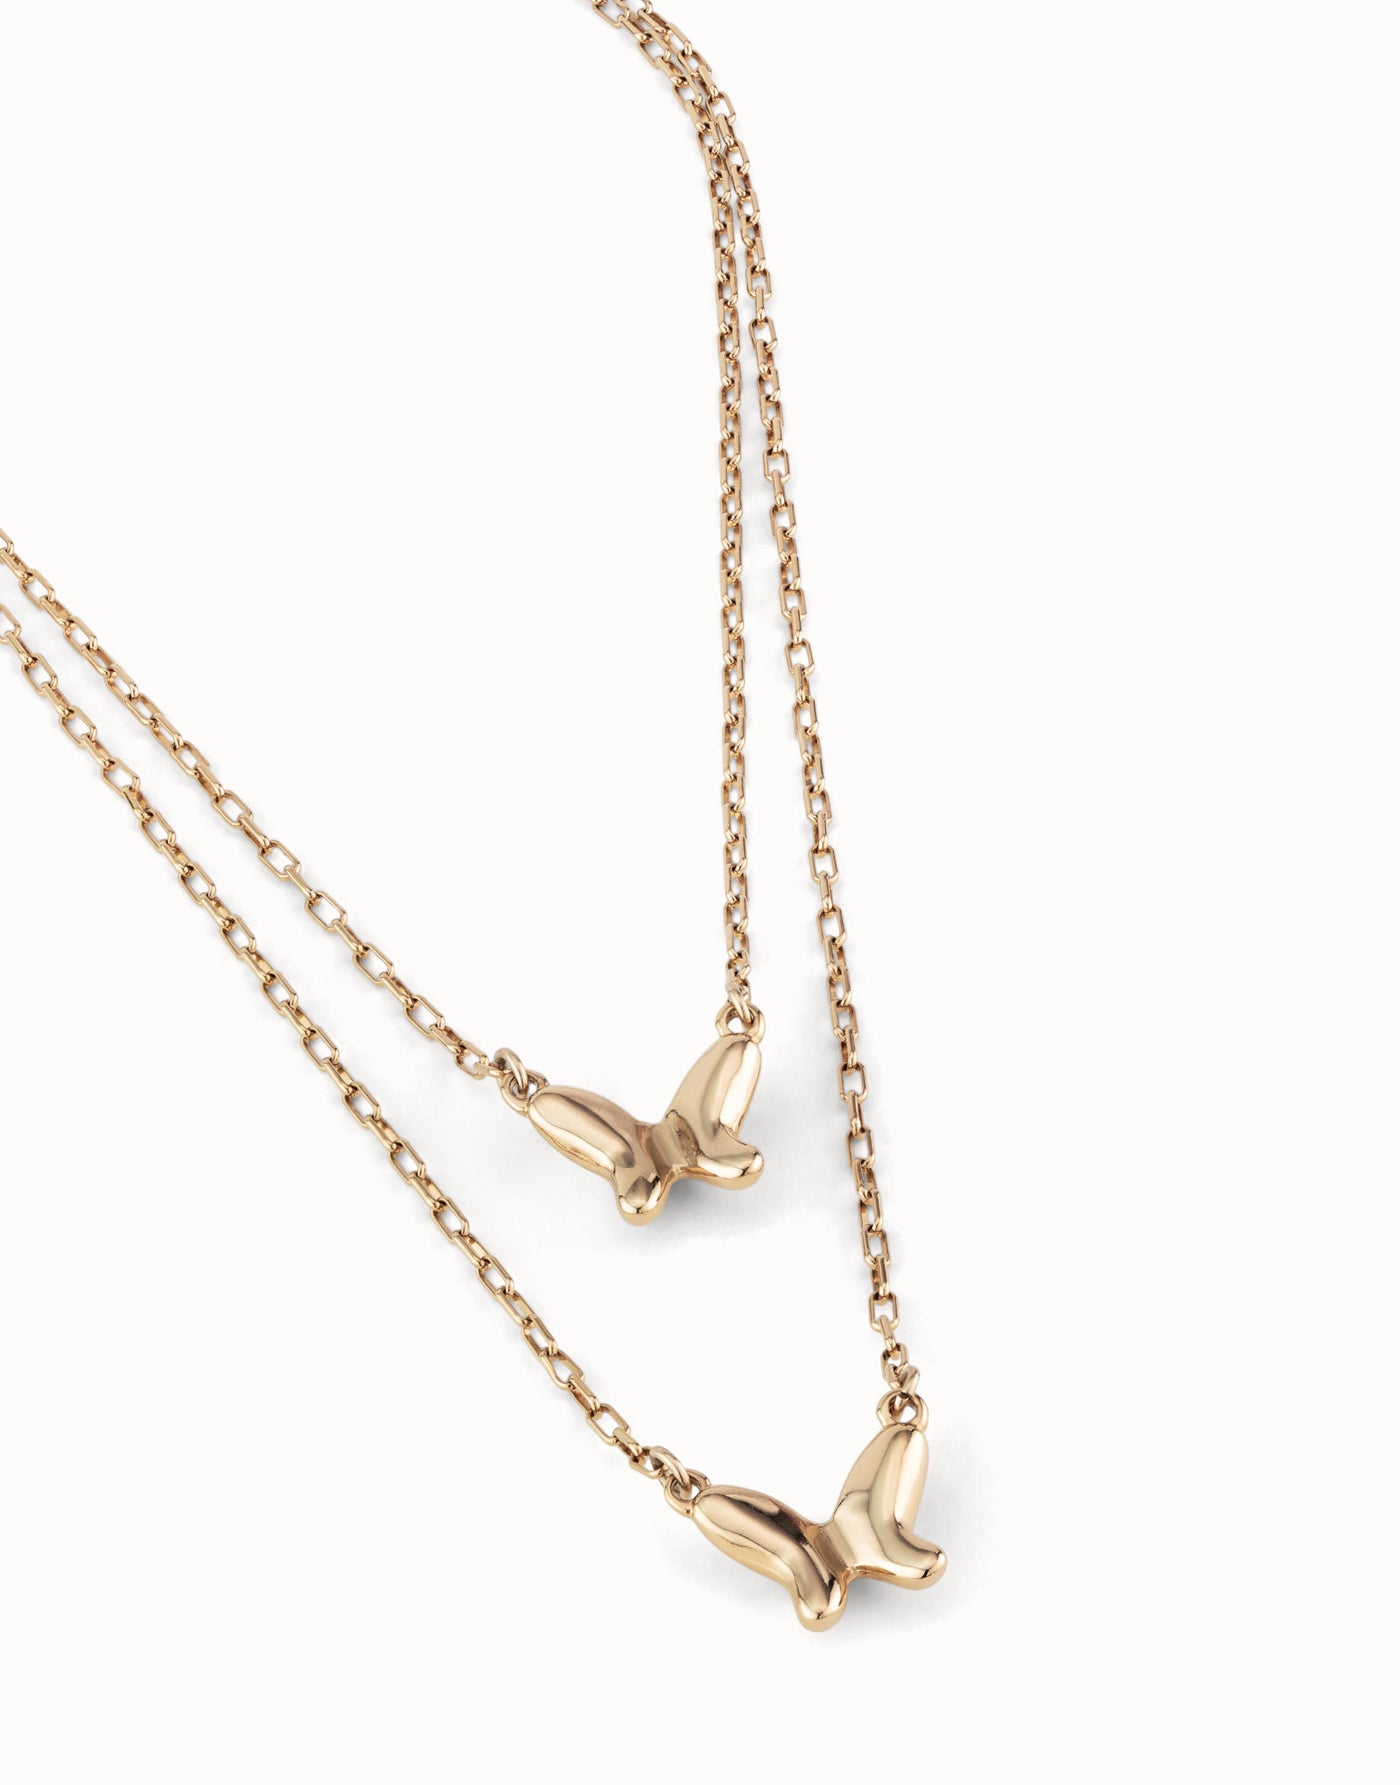 Doublefly Necklace, Gold